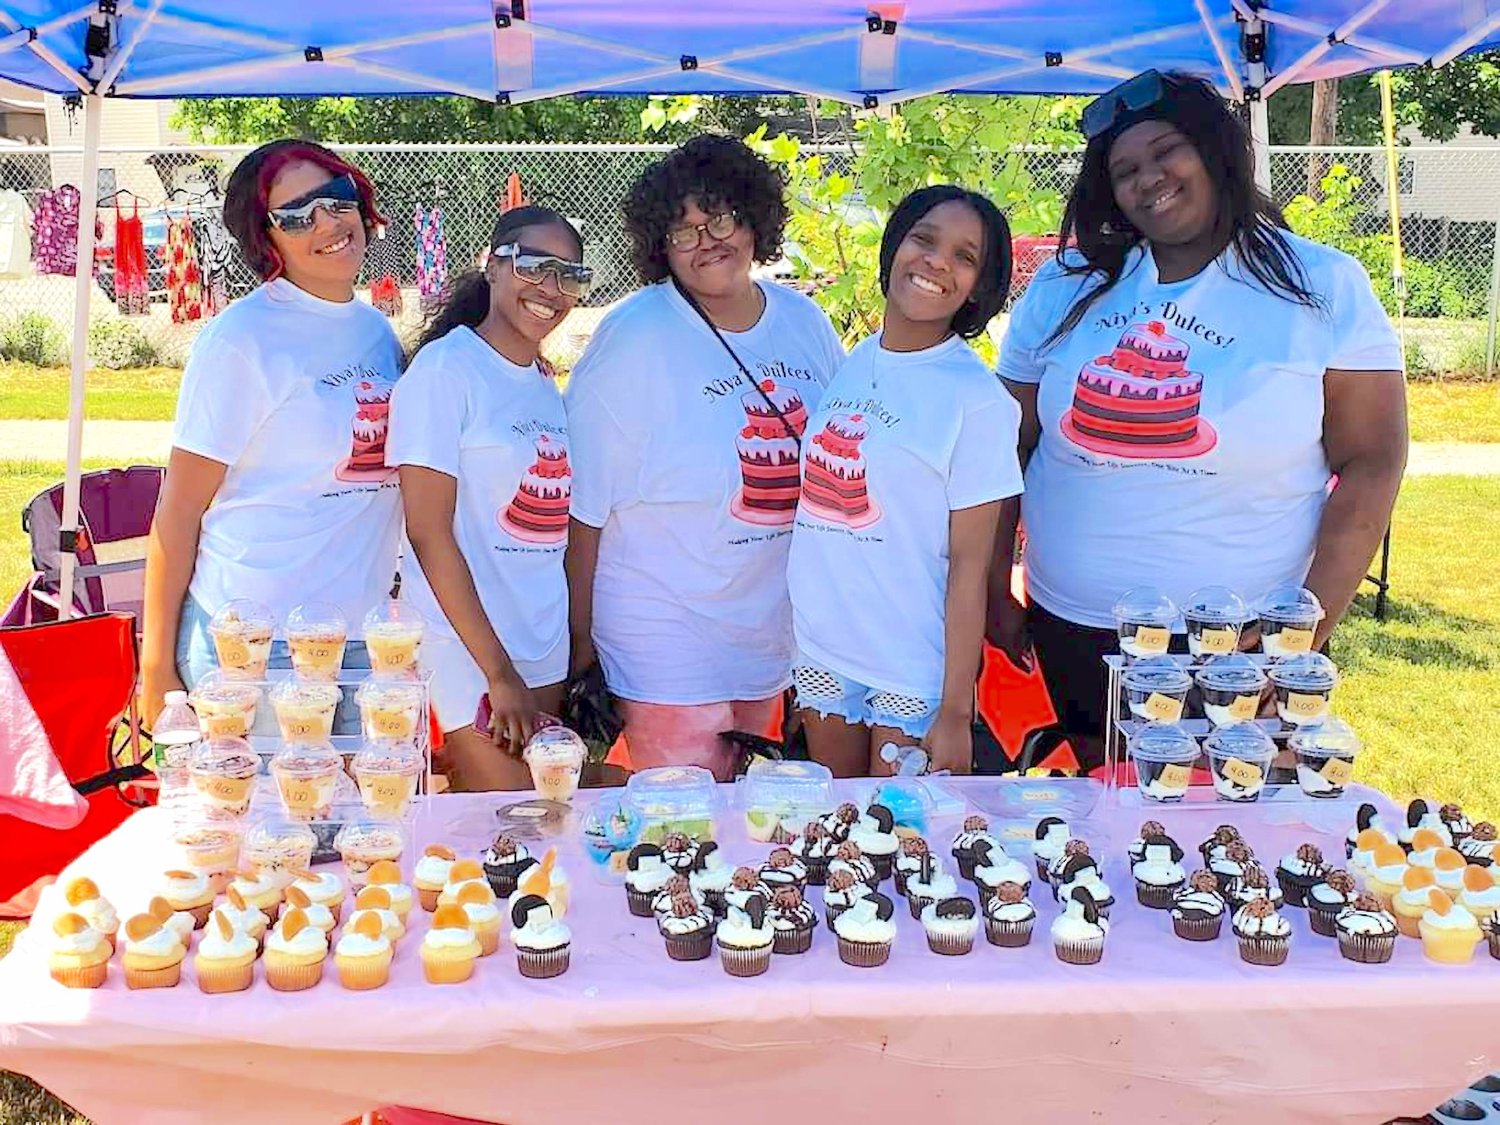 Ja’Niya Howard, fourth from left, owner of Niya’s Dulces, pictured at the 2021 pre-Juneteenth event. Howard, a senior at Thomas R. Proctor High School, will be back at this year’s event with a variety of desserts on Saturday, June 11 at Kemble Park in Utica.